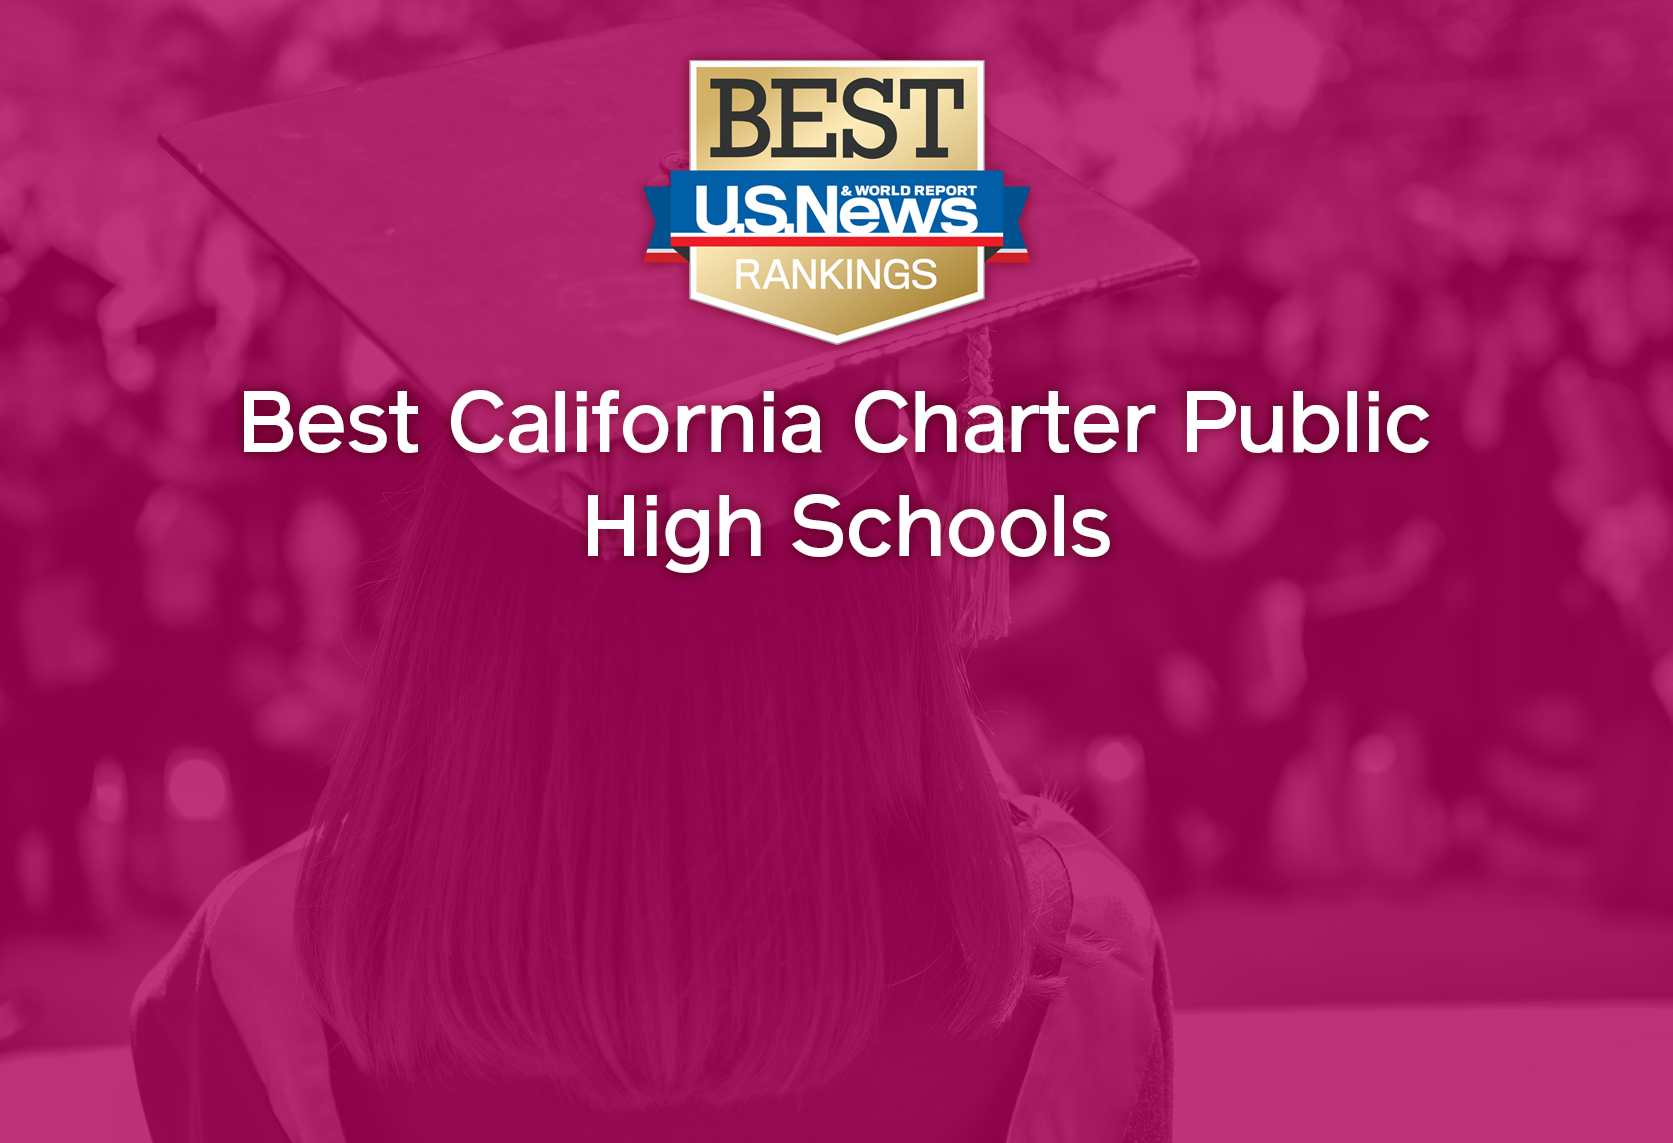 U.S. News And World Report Best Charter Public High Schools 3 #keepProtocol